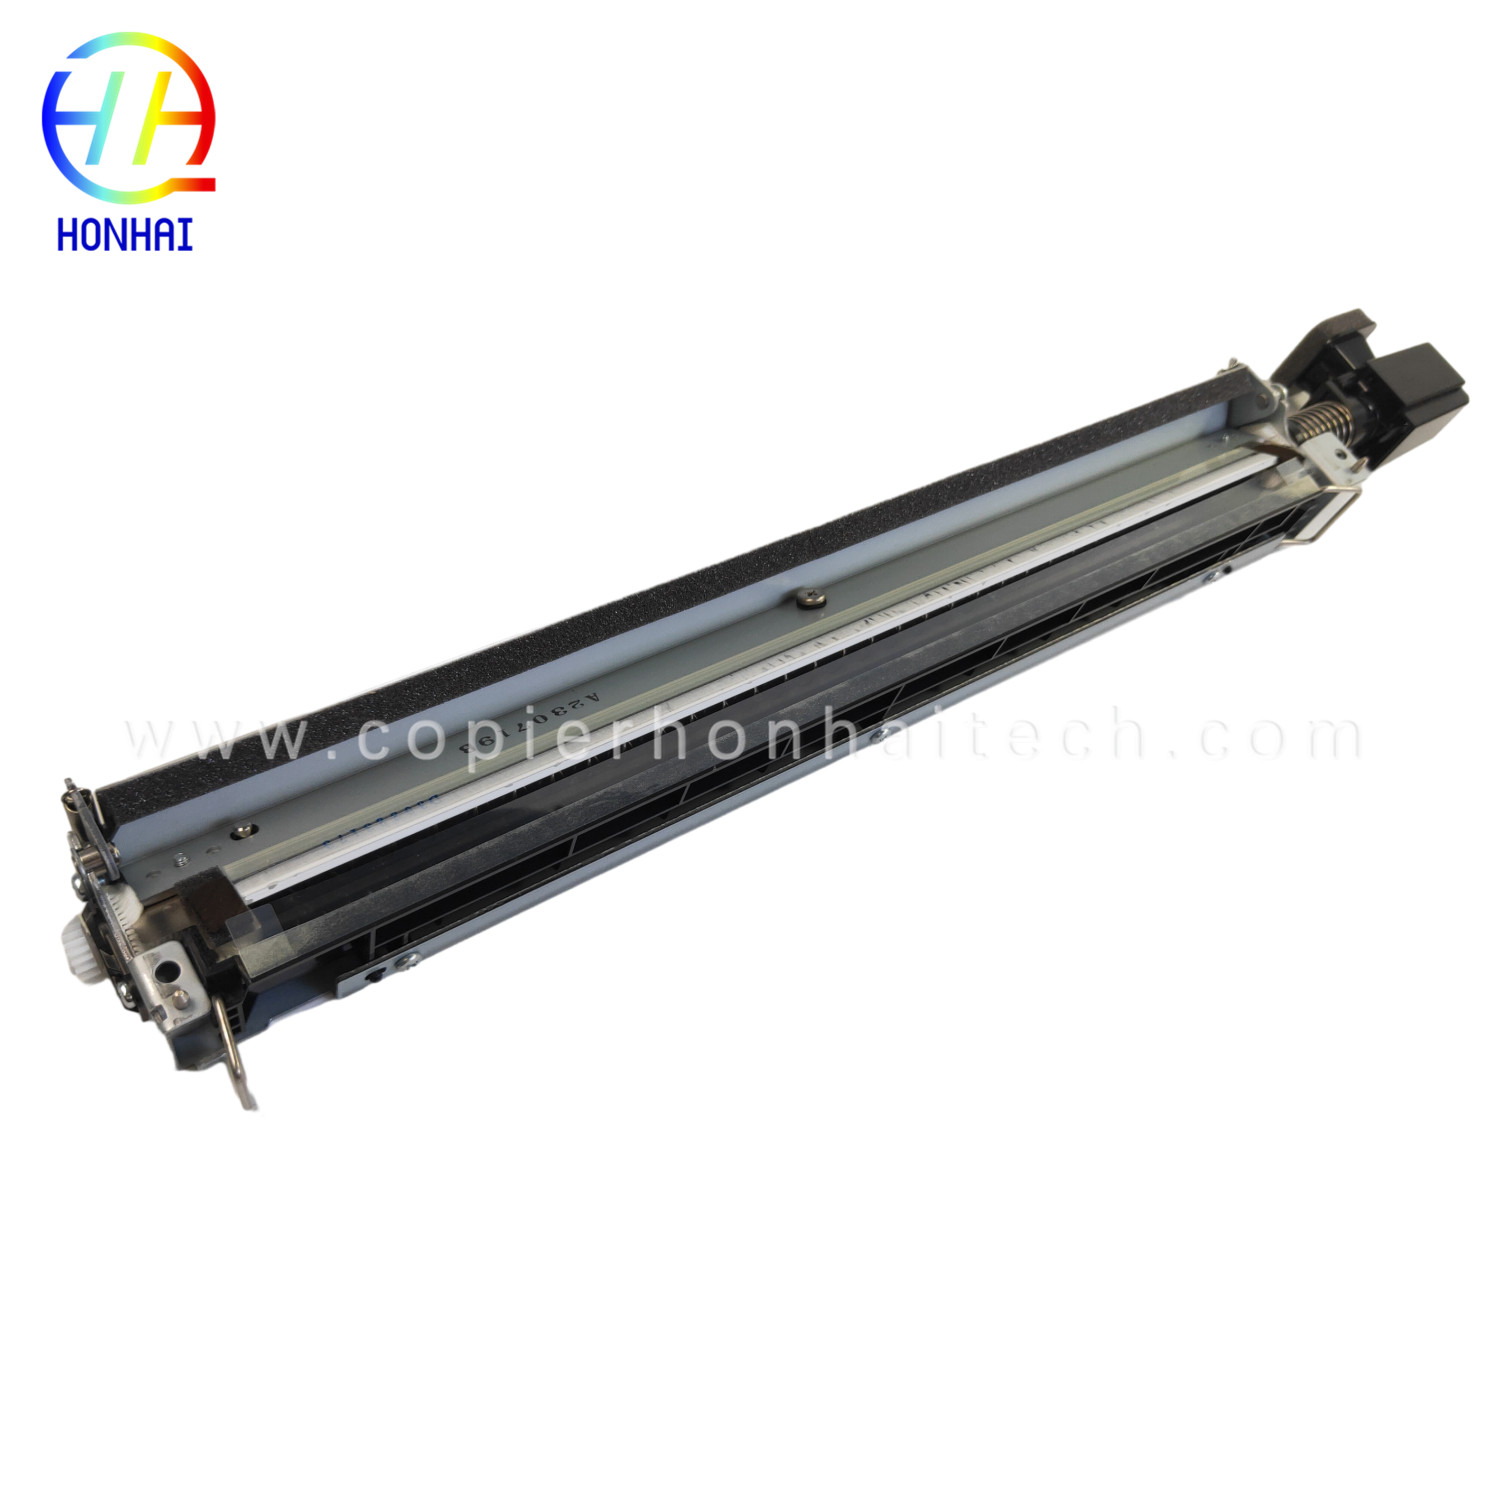 Transfer Cleaning Assembly for Canon imageRUNNER ADVANCE C5030 C5035 C5040 C5045 C5051 C5235 C5240 C5250 C5255 FM4-7244-020 FM4-7244-010 FM4-7245-000 FM3-5932-000 Transfer Cleaning Unit